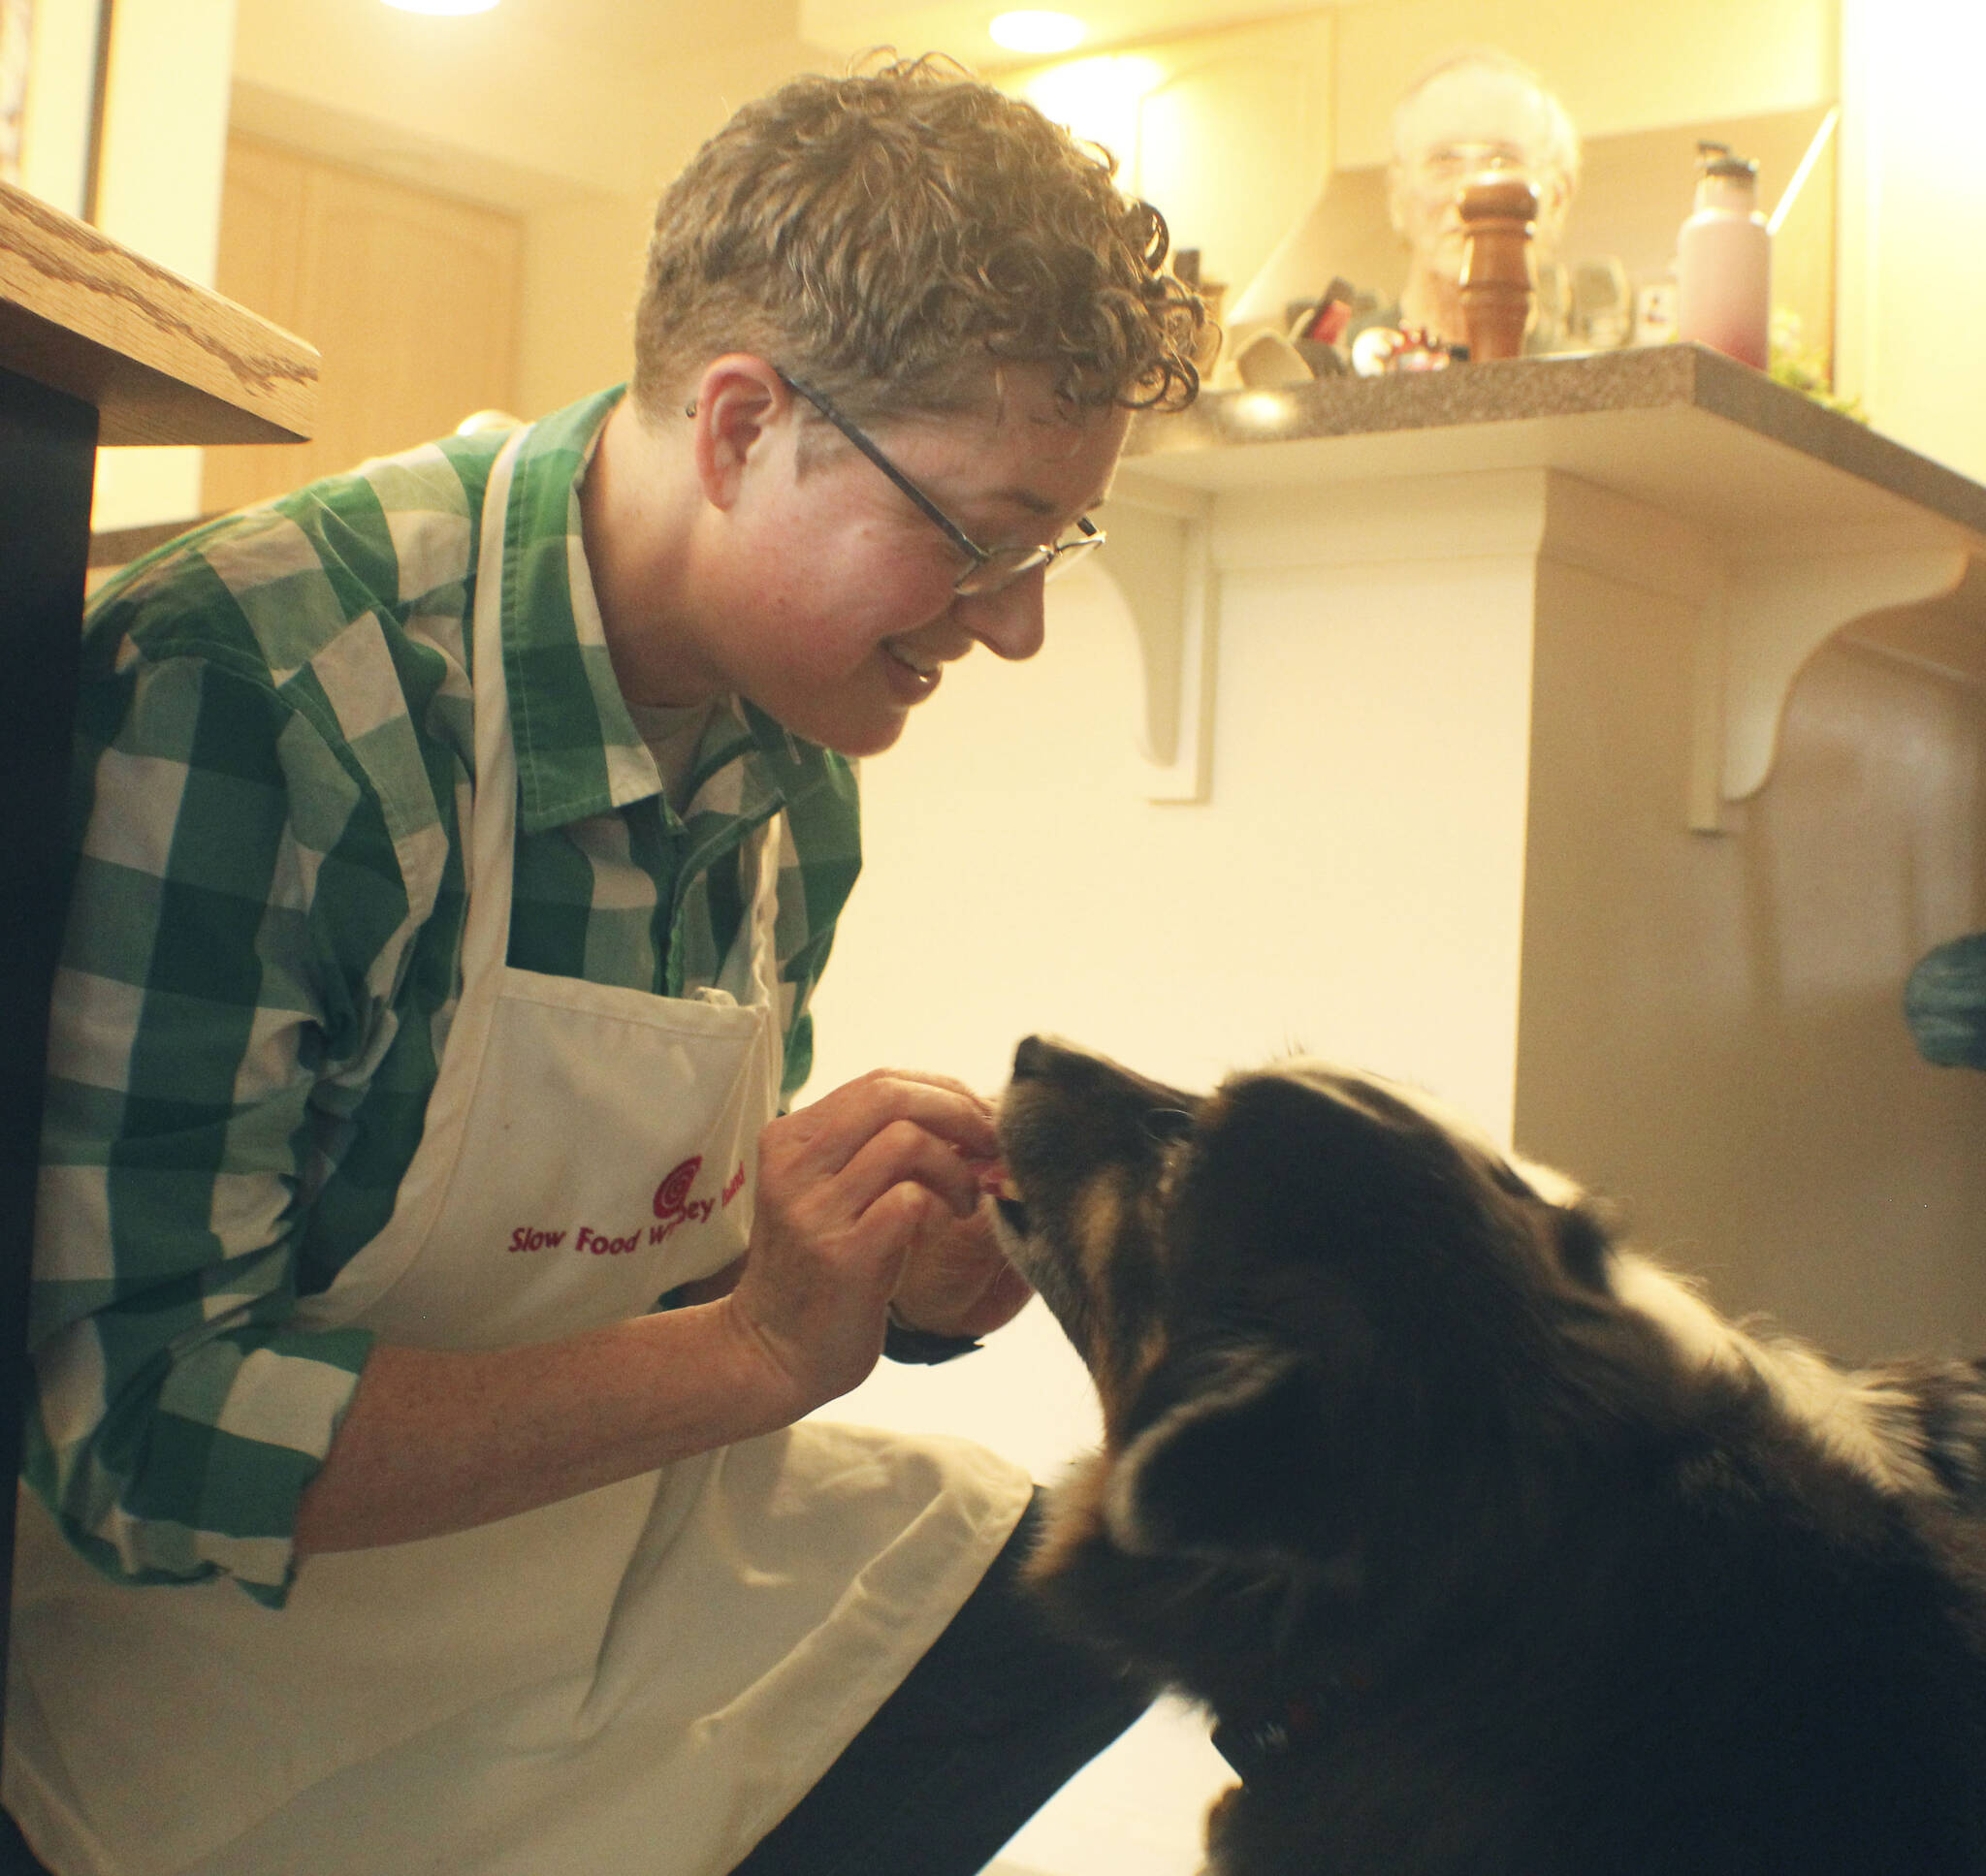 Photo by Karina Andrew/Whidbey News-Times
Arjai Allred runs their homemade dog treats by a couple expert taste testers.